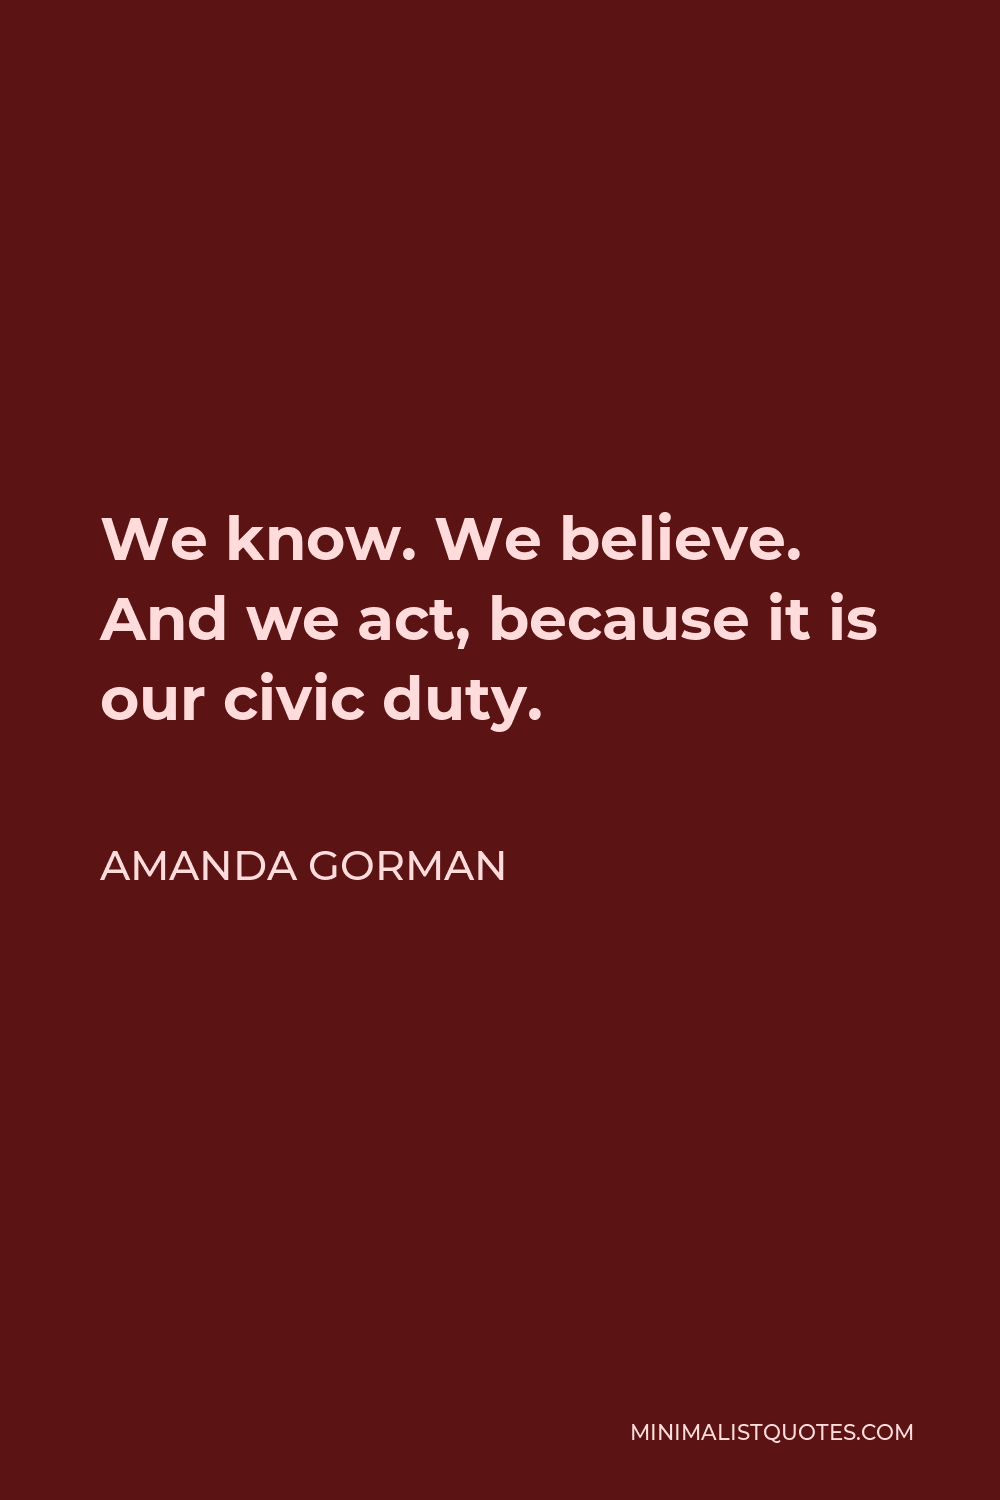 Amanda Gorman Quote - We know. We believe. And we act, because it is our civic duty.